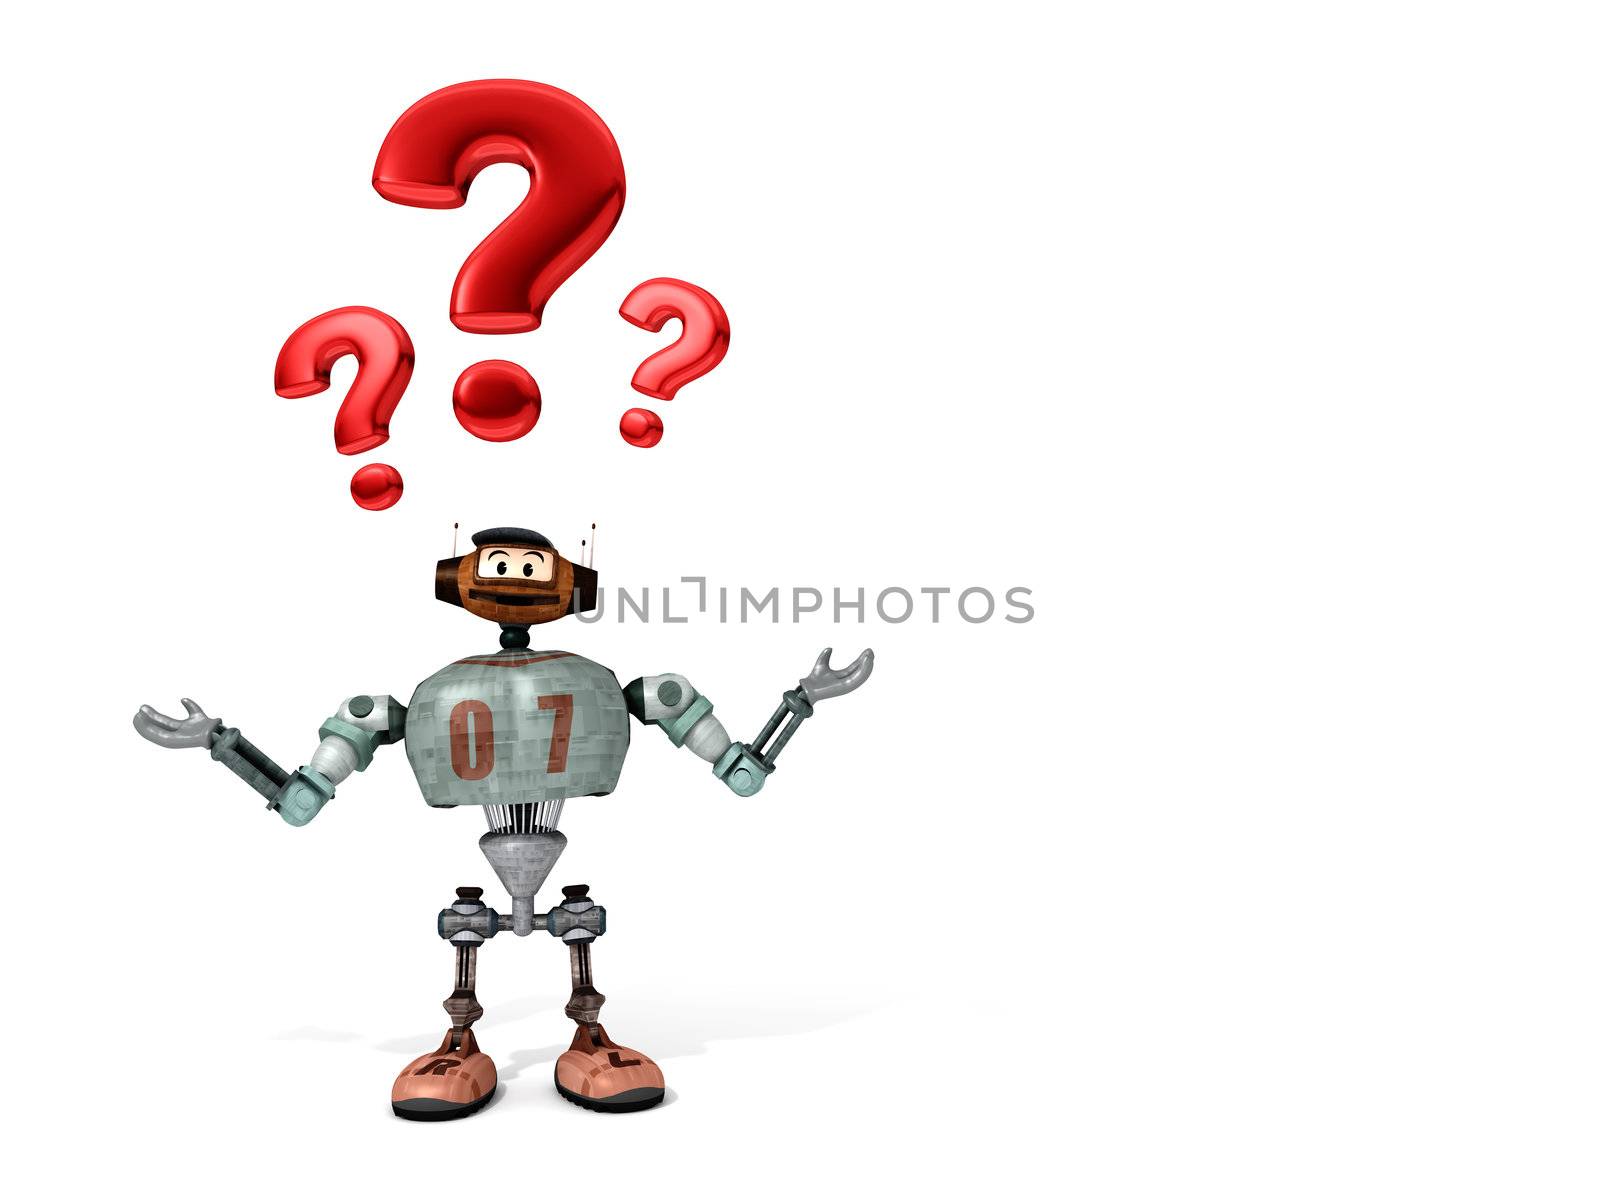 Djoby the robot happy surprised with a white background